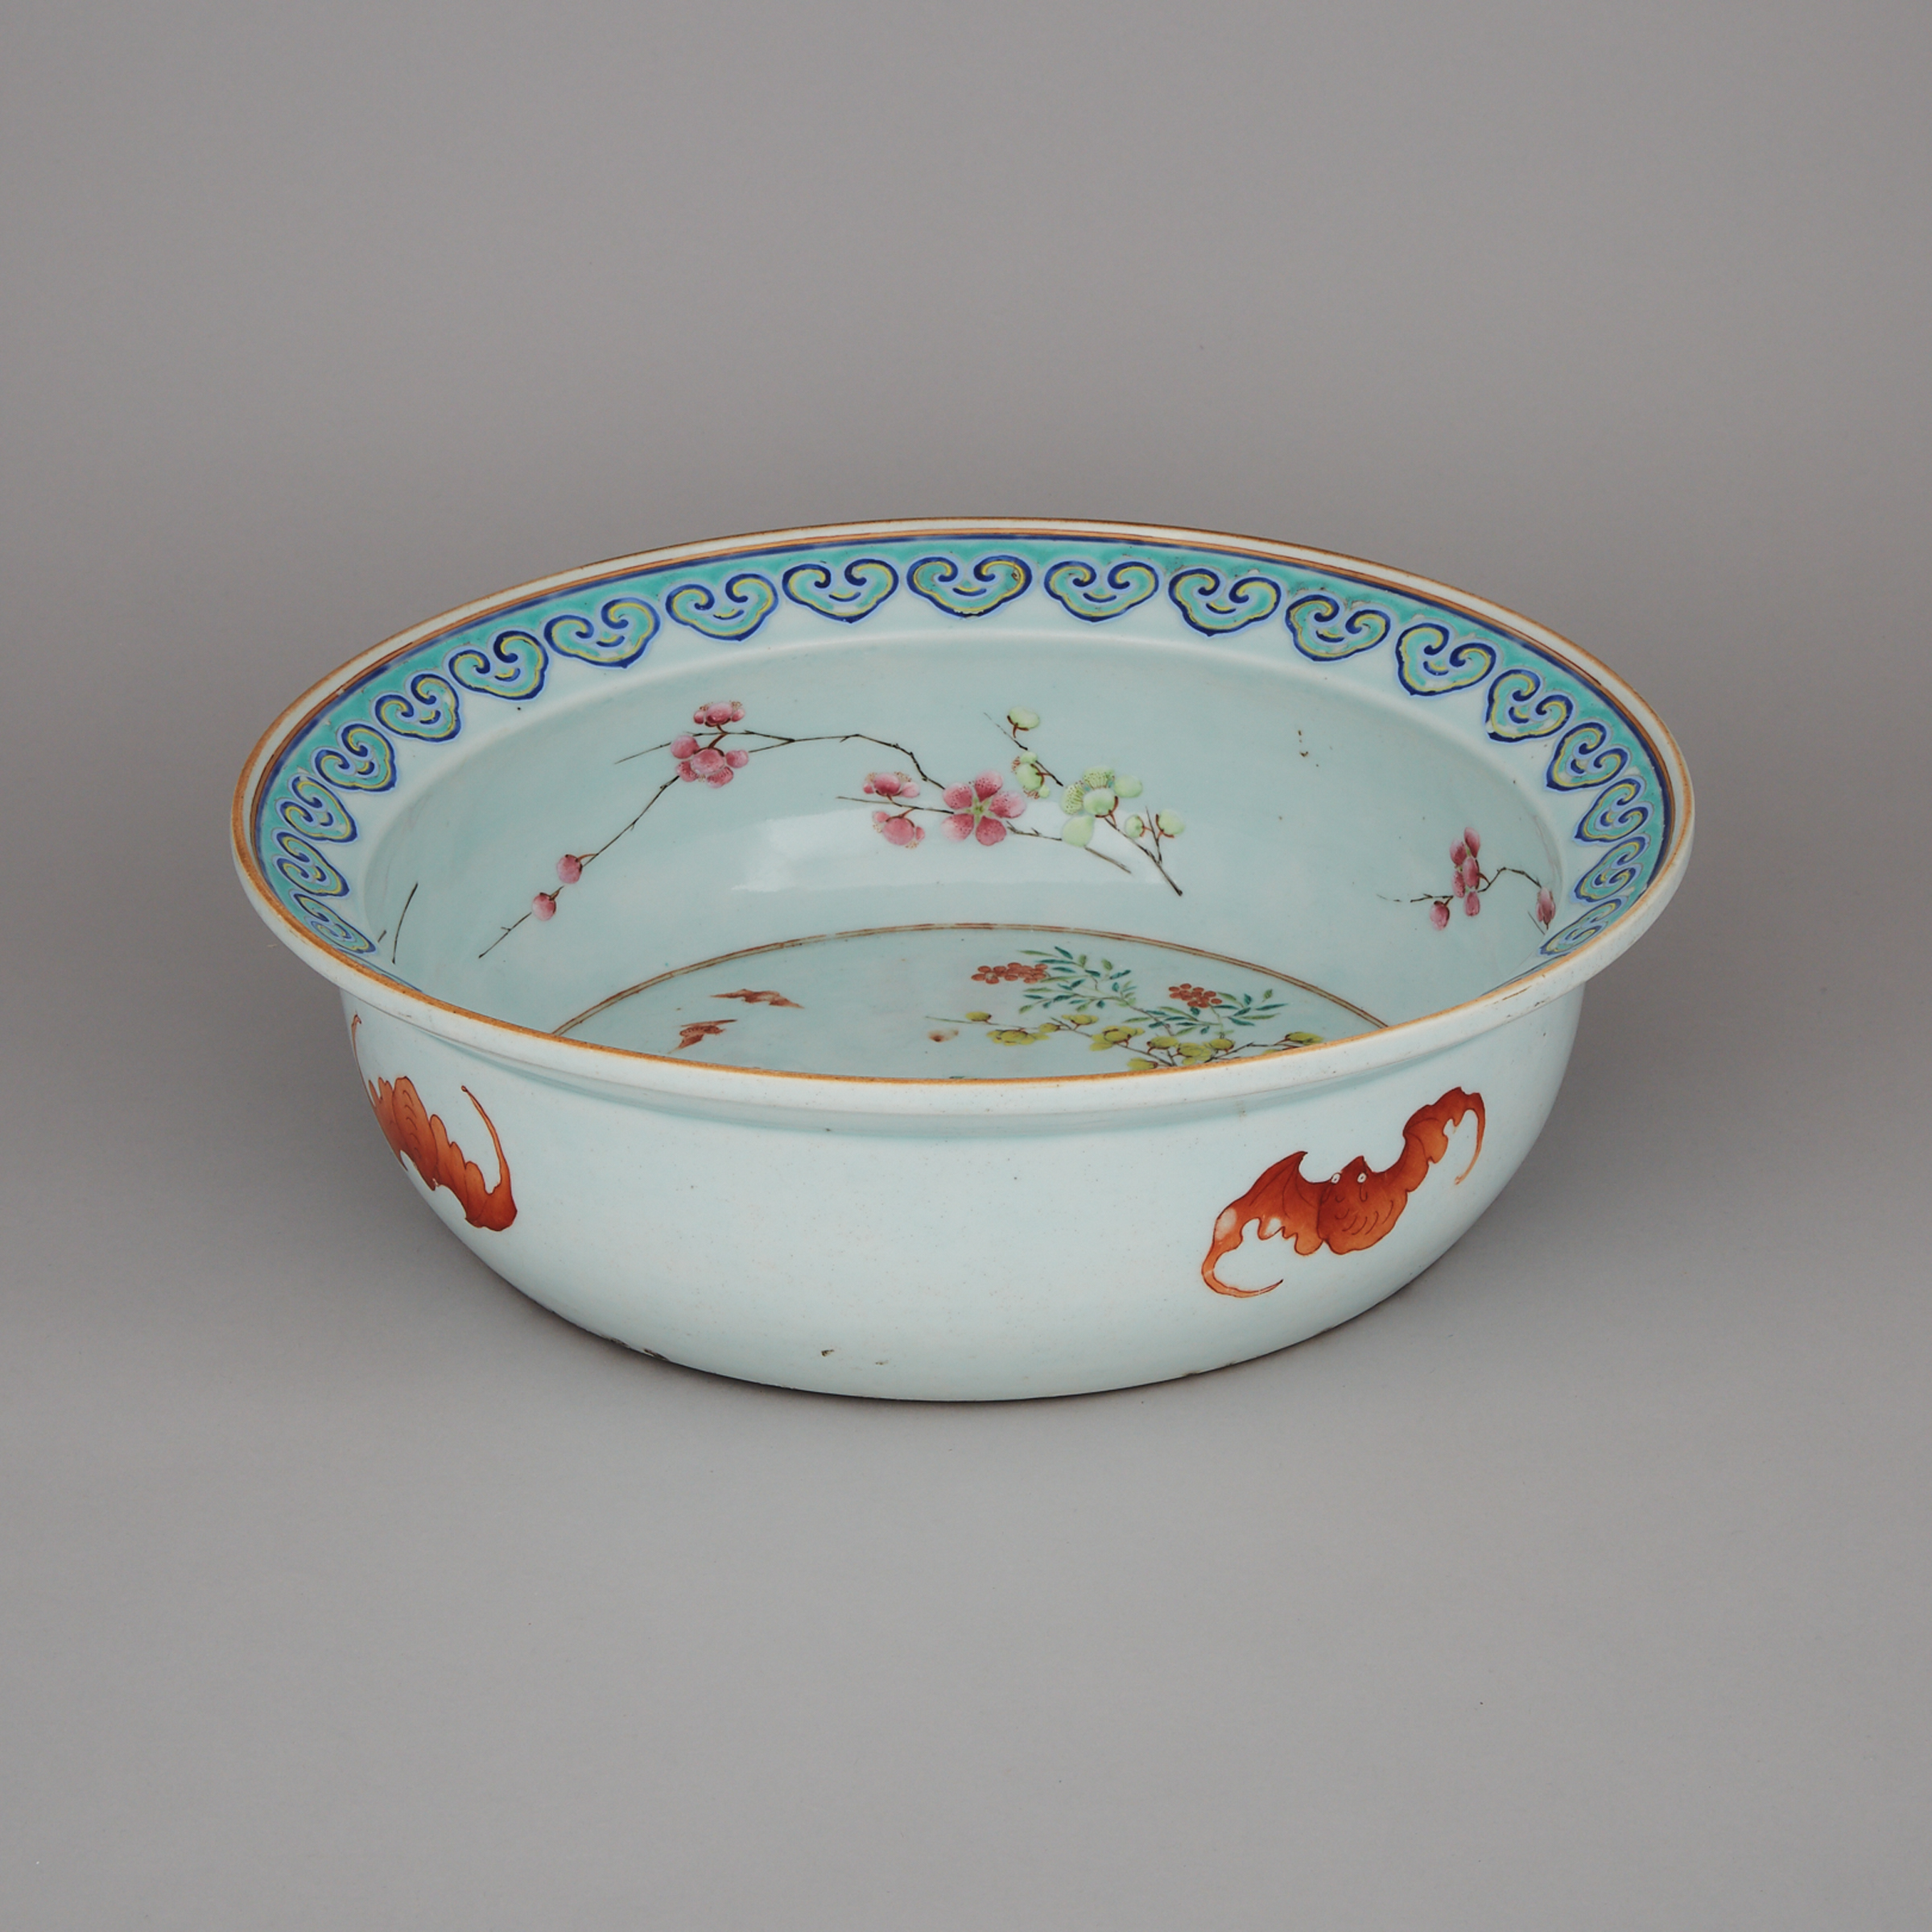 A Large Famille Rose Washbasin, Republican Period